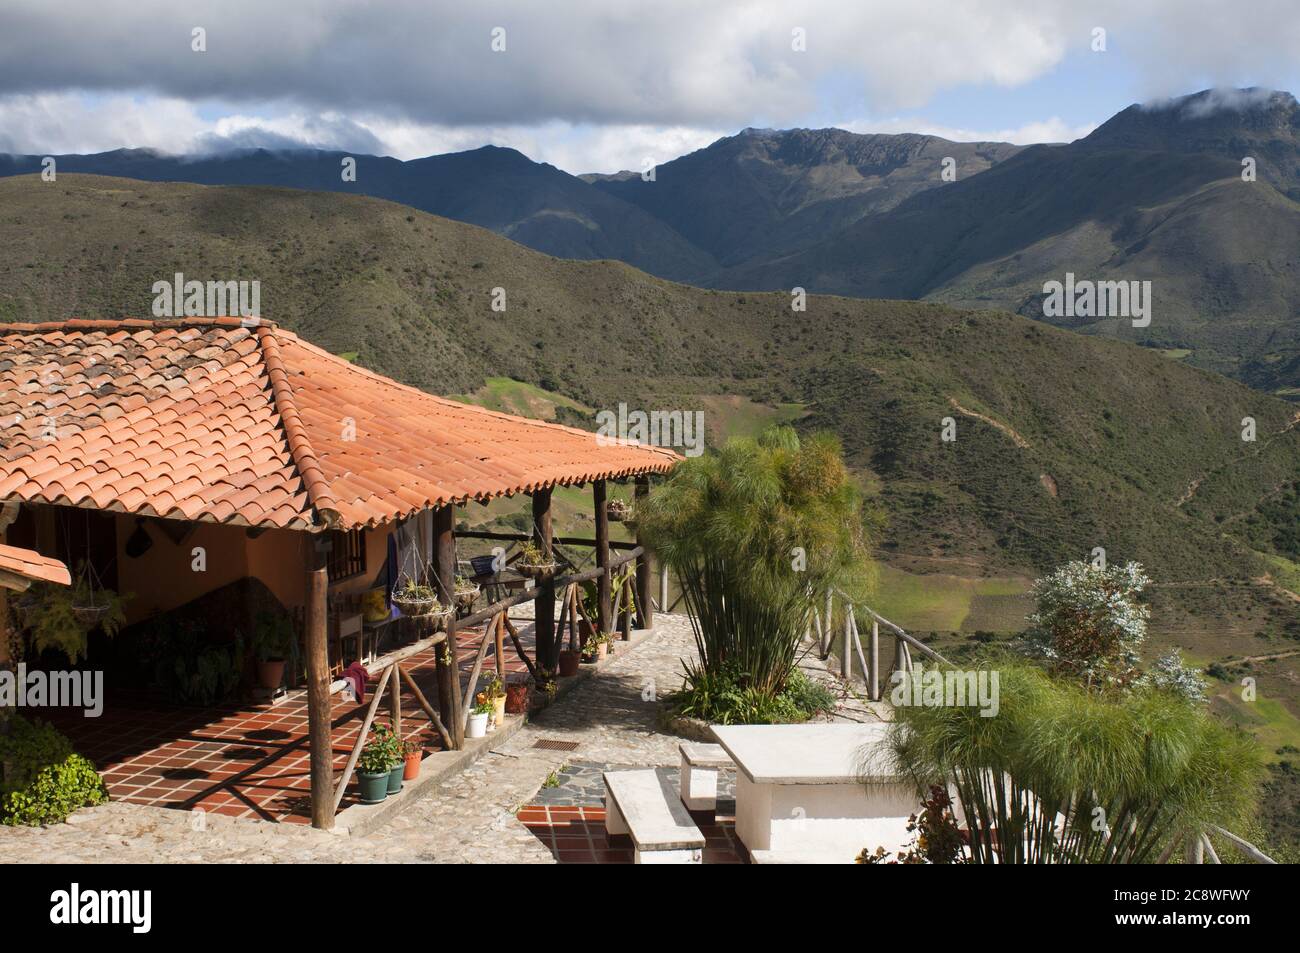 Posada Bella Vista in Los Nevados village in andean cordillera Merida state Venezuela. Los Nevados, is a town founded in 1591, located in the Sierra Nevada National Park in Mérida, Venezuela, located 2,710 meters above sea level and with a population of 2000 inhabitants. its name comes from the glaciers of the peaks León, Toro and Espejo that could be seen from Los Nevados before their disappearance in the 1960s . the main activity of the area is tourism, with its horse and donkey rides via the cable car station Loma Redonda. Its inhabitants are also engaged in farming, especially the cultivat Stock Photo